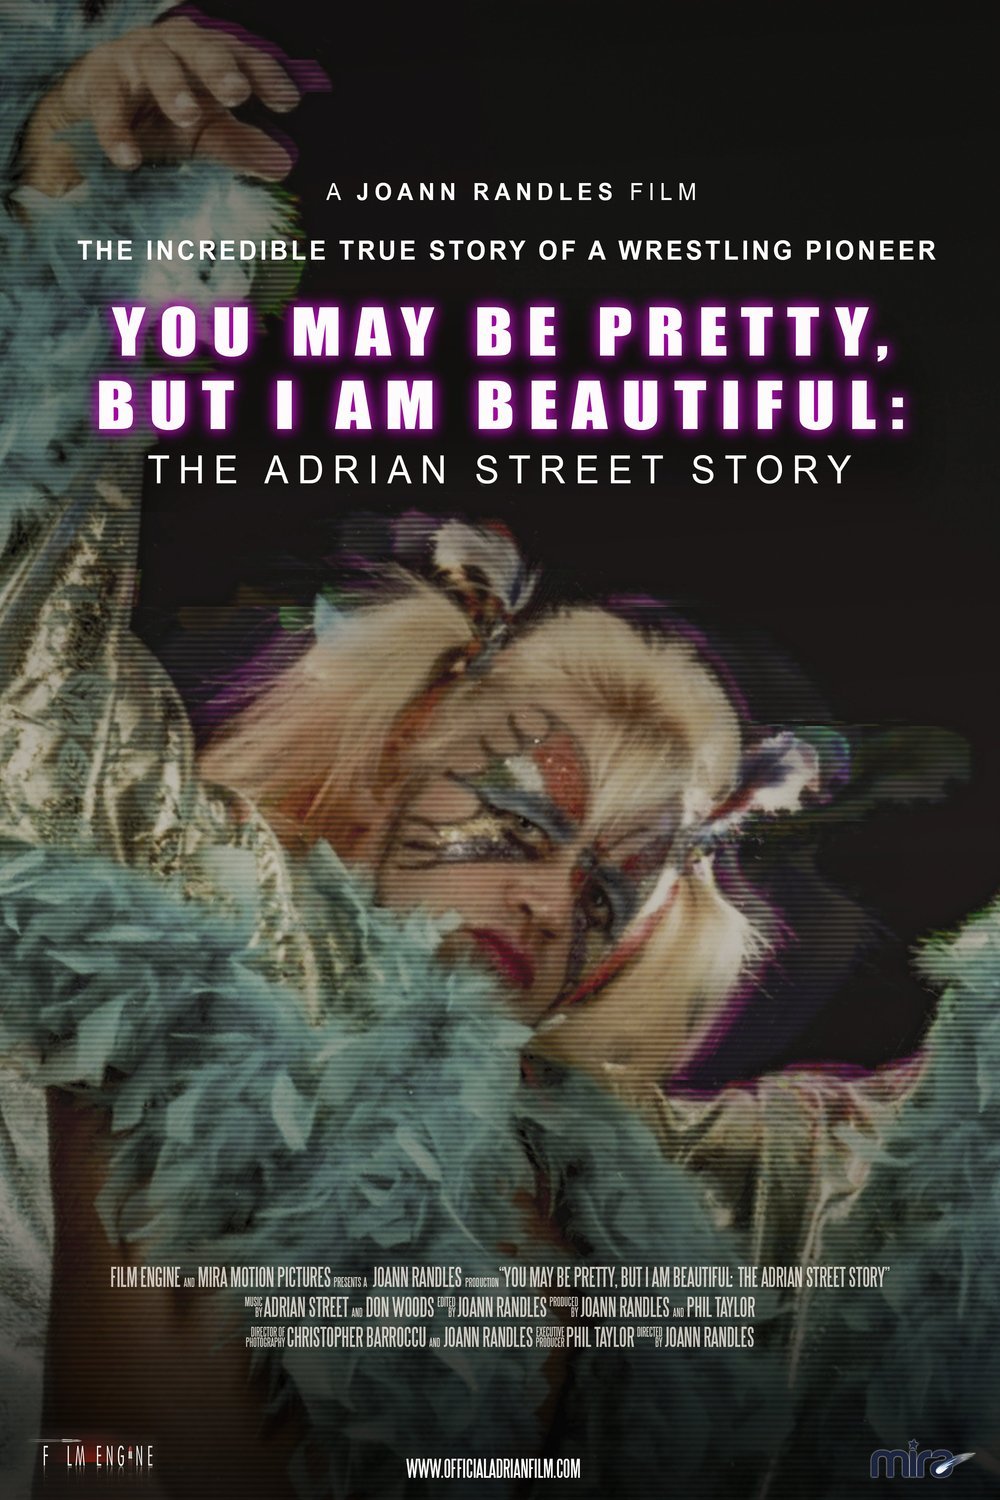 L'affiche du film You May Be Pretty, But I Am Beautiful: The Adrian Street Story